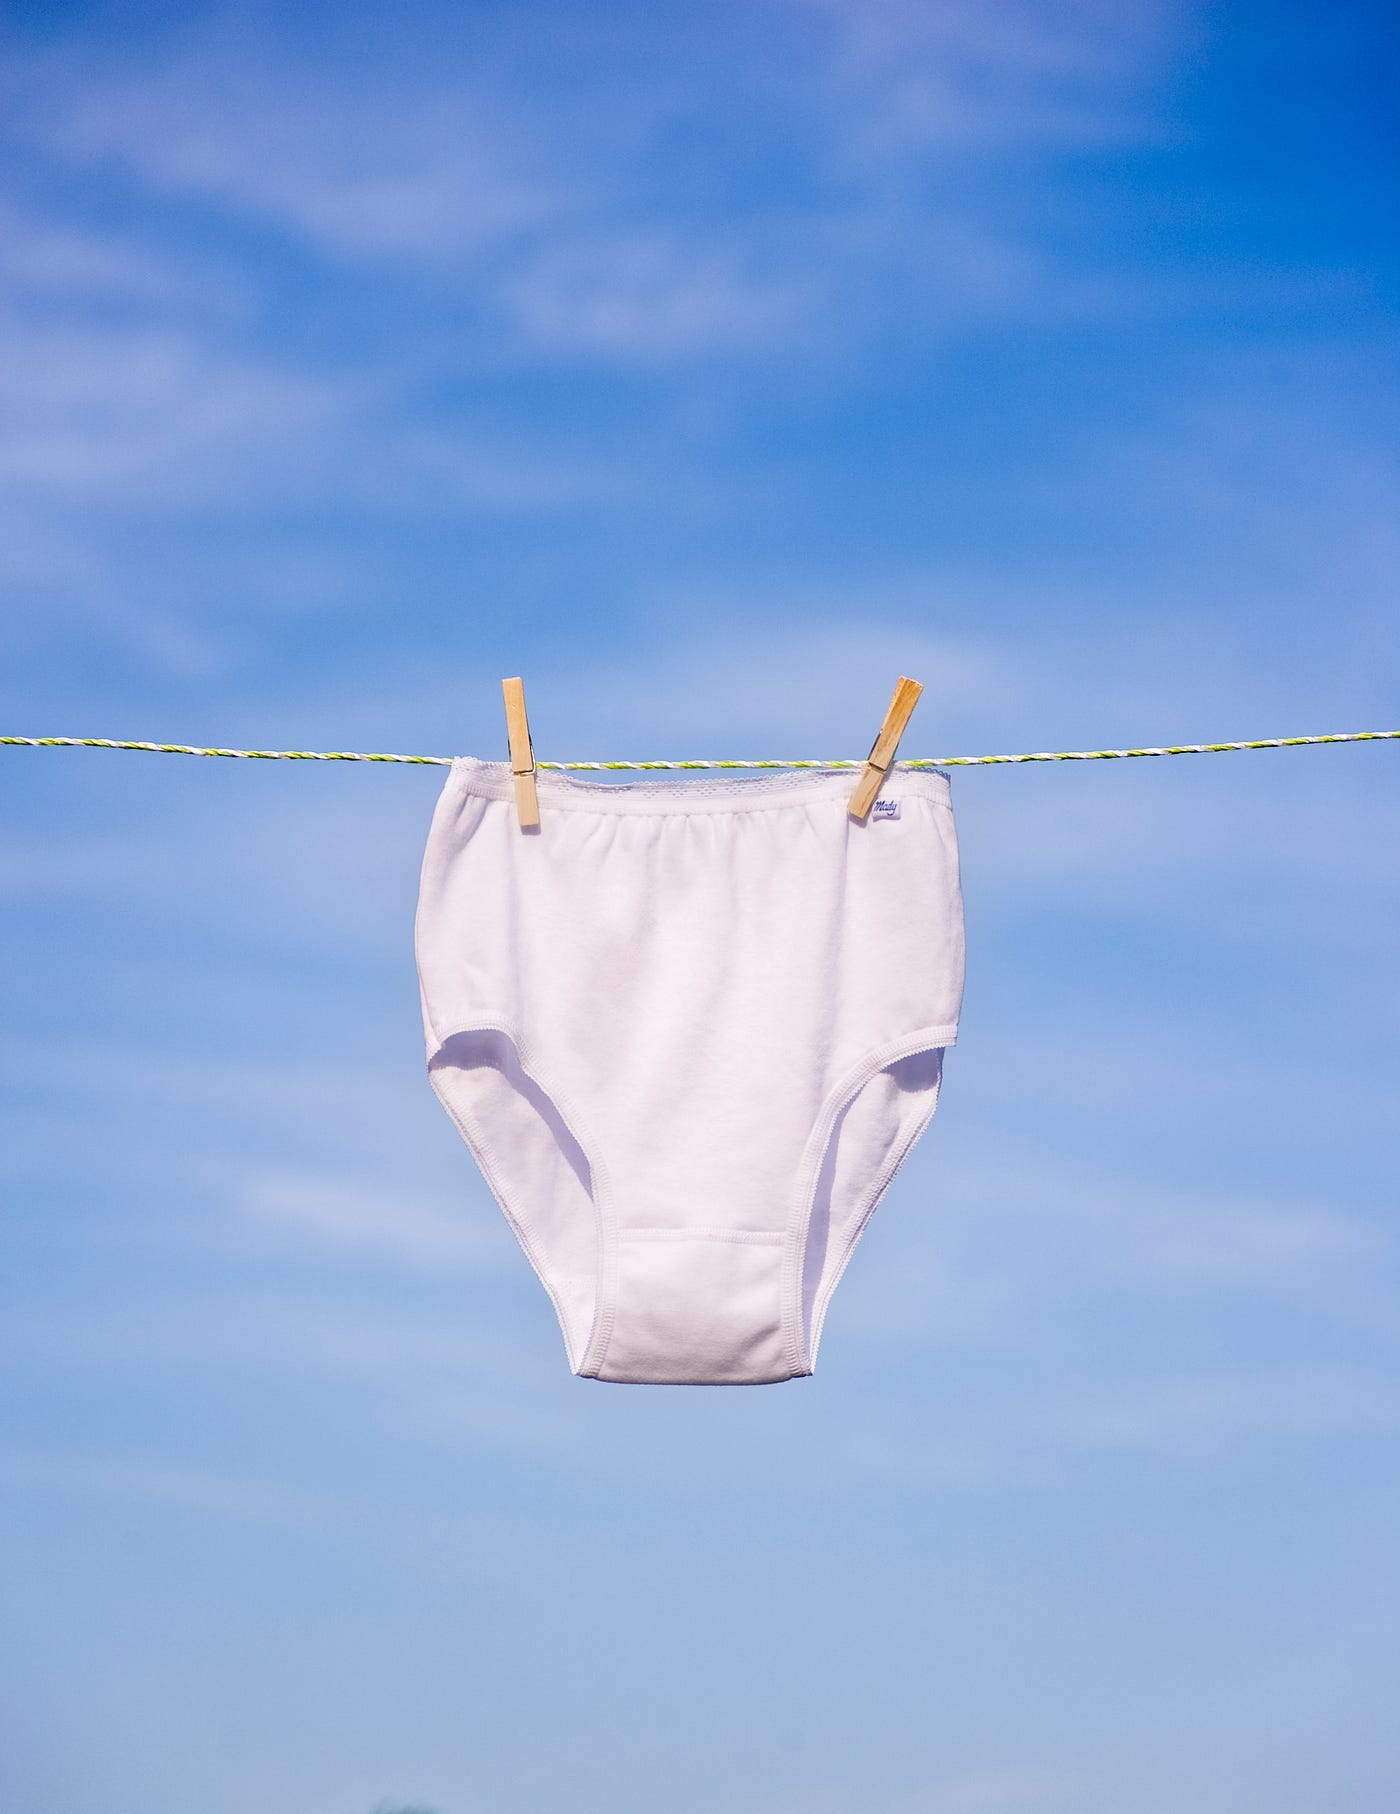 My Twin Sister Makes Me Hang Up My Underwear, by Evelyn Martinez, Invisible Illness